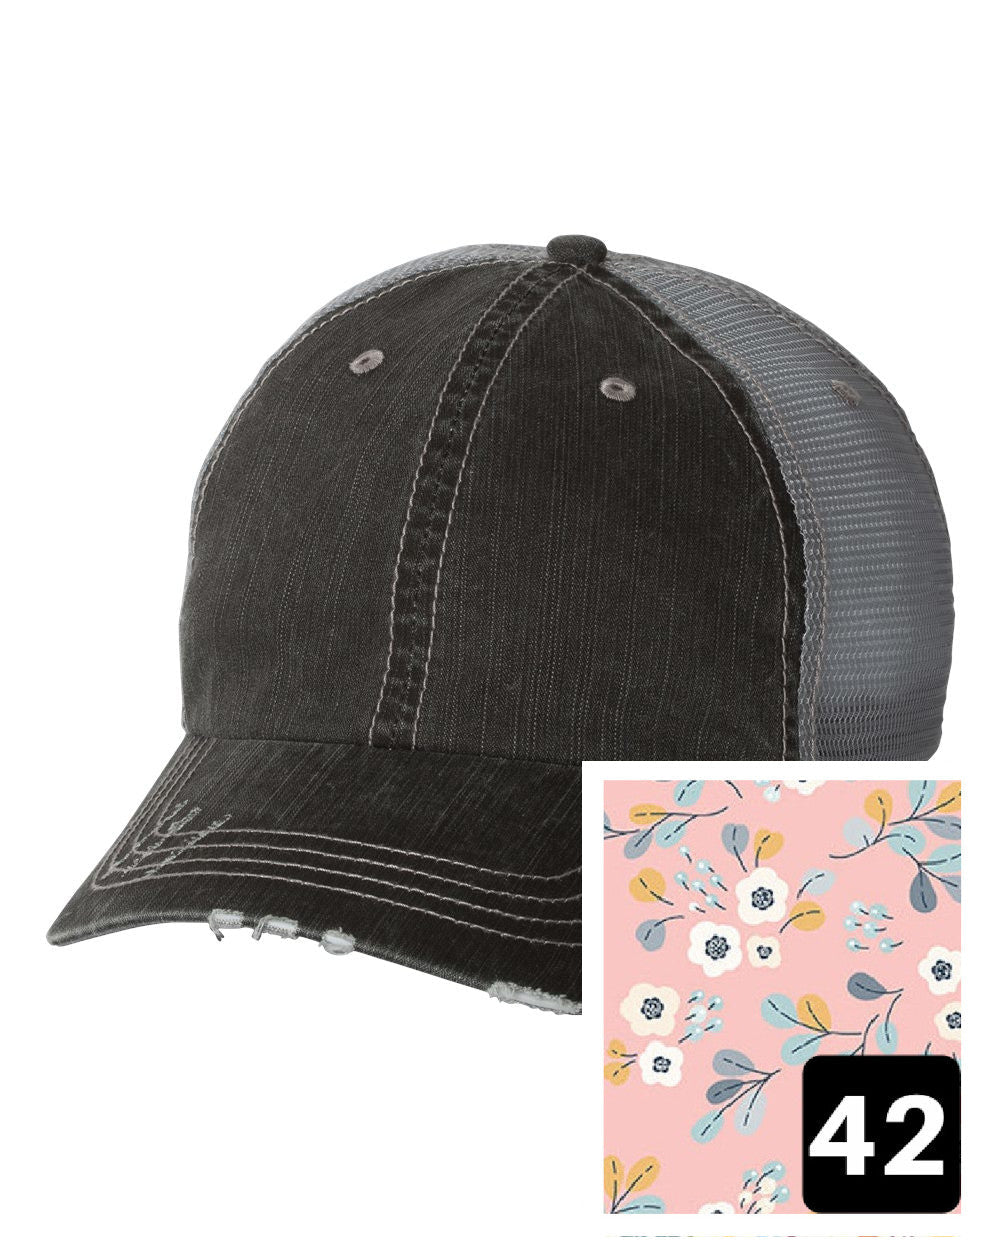 gray distressed trucker hat with light blue and pink mosaic fabric state of South Carolina